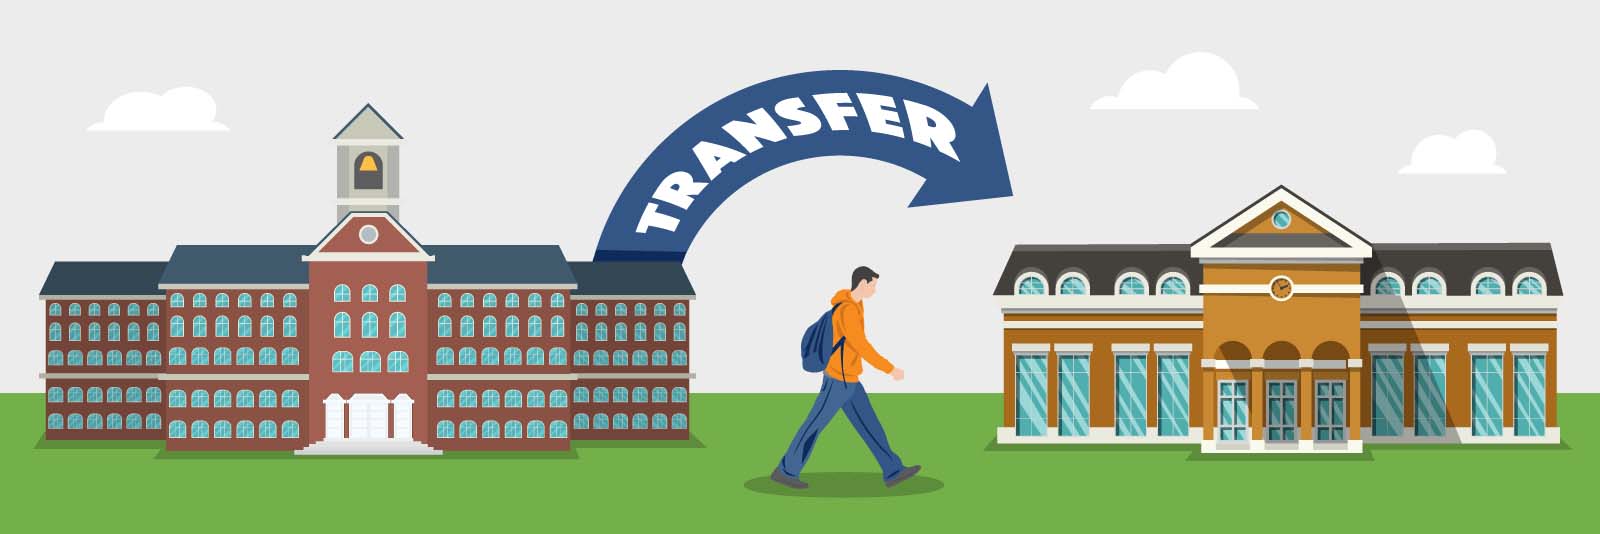 Transfer student clipart